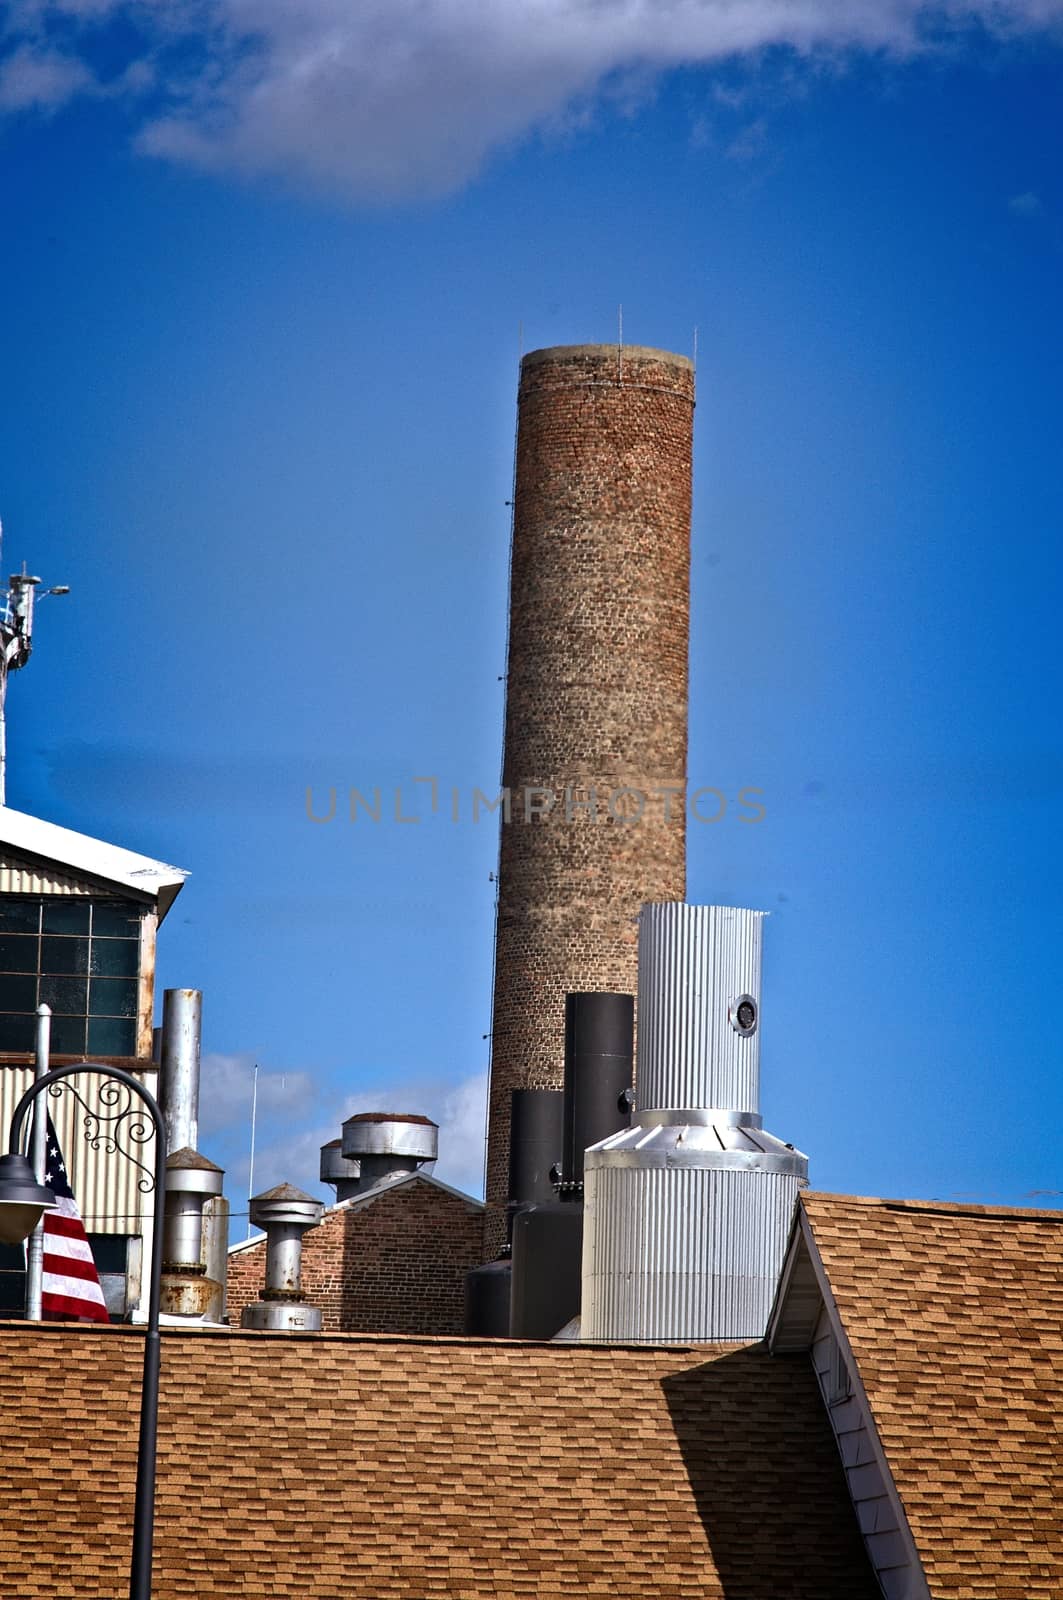 This is a unique collection of vents and smoke stacks  on a  bright day. 